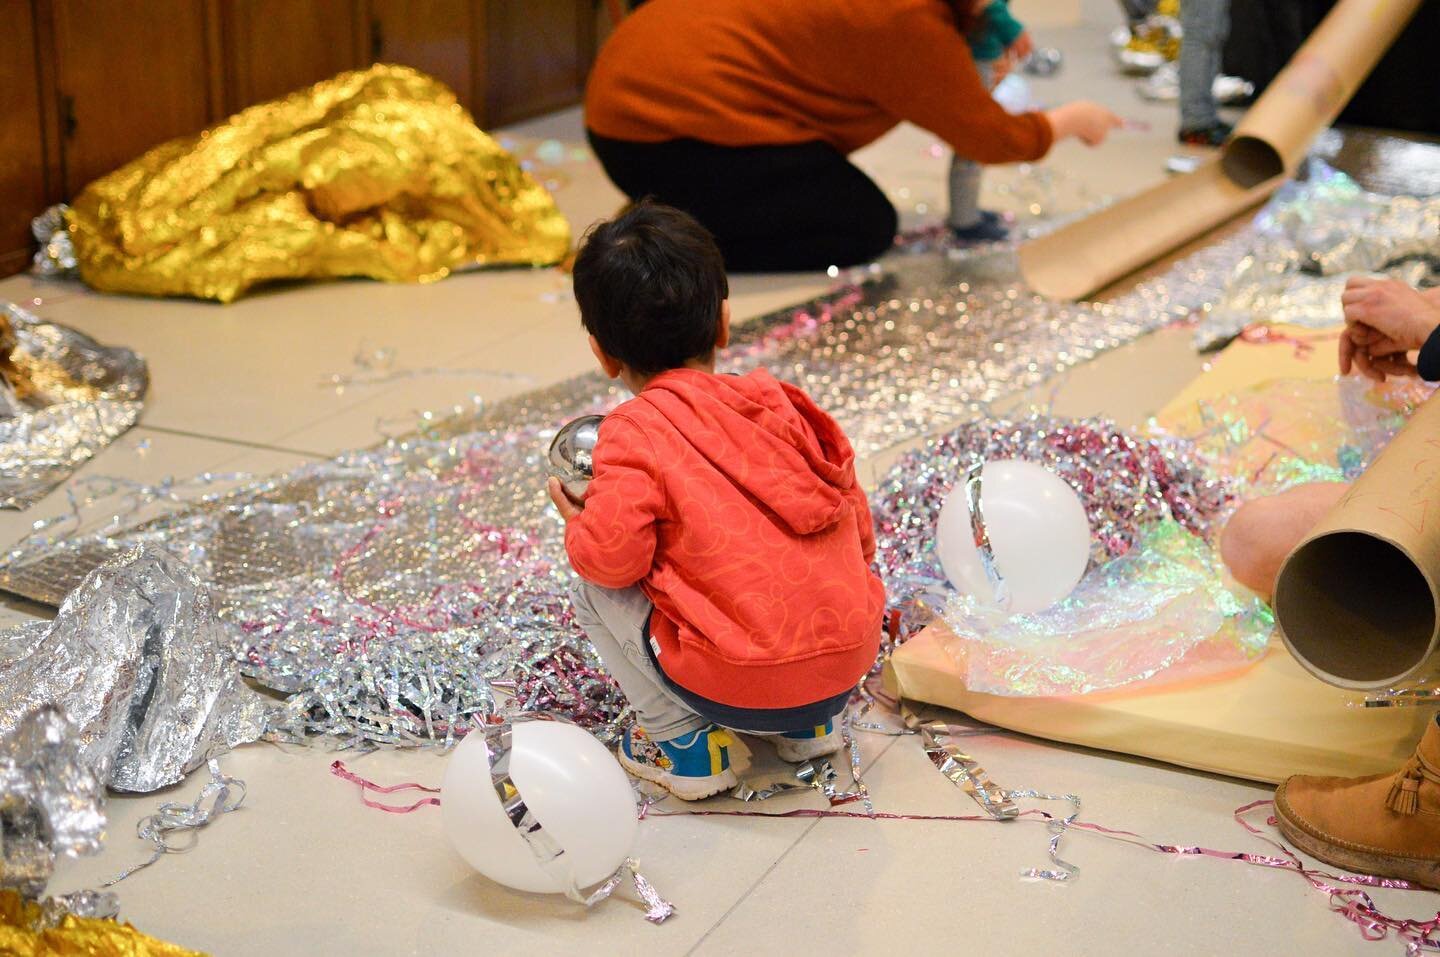 As we plan for lots of amazing summer sessions, we&rsquo;d love to know:

🎈 What do you look forward to the most about coming to our sessions?

🖍️ What would you like to do more of at Leicester Gallery Play?

🌈 What new play ideas or things would 